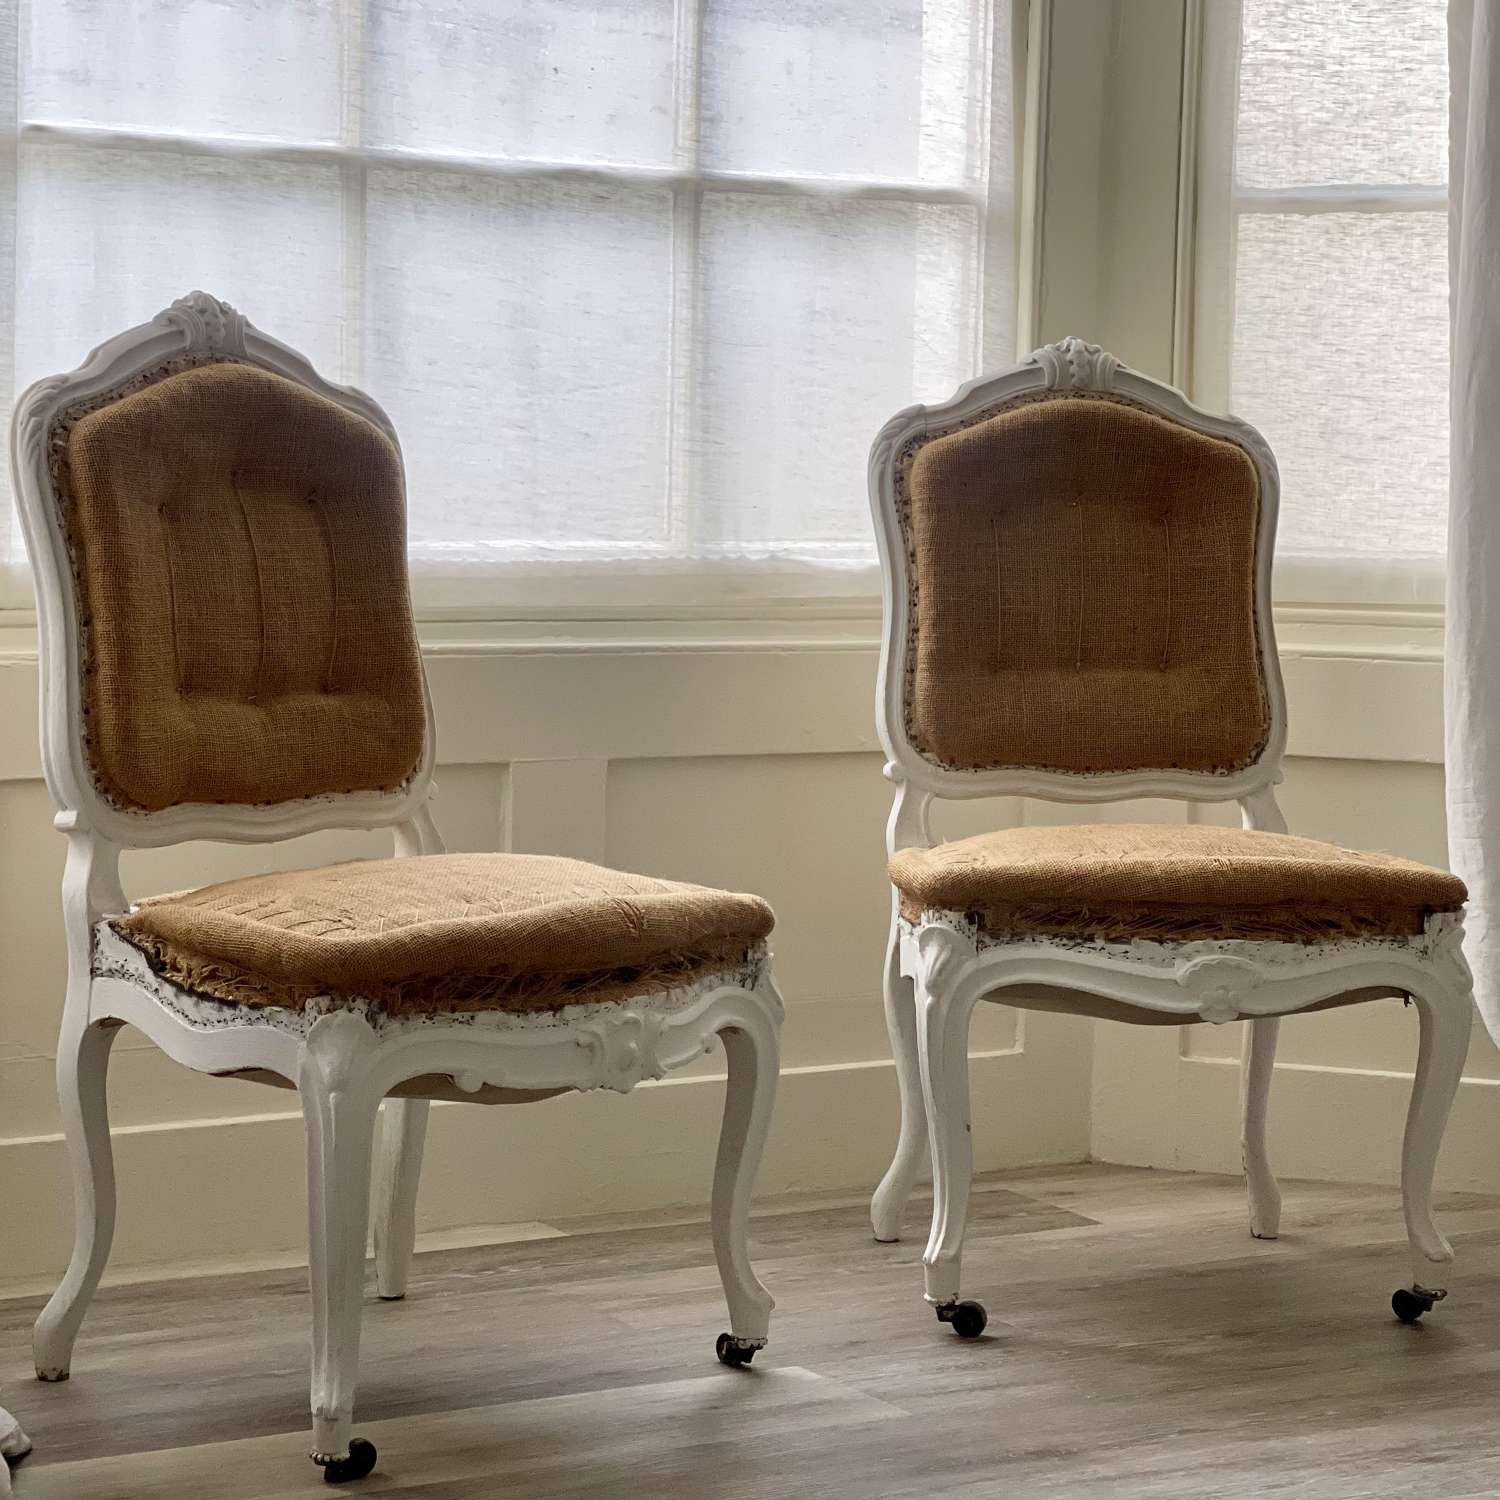 Pair of antique French chairs